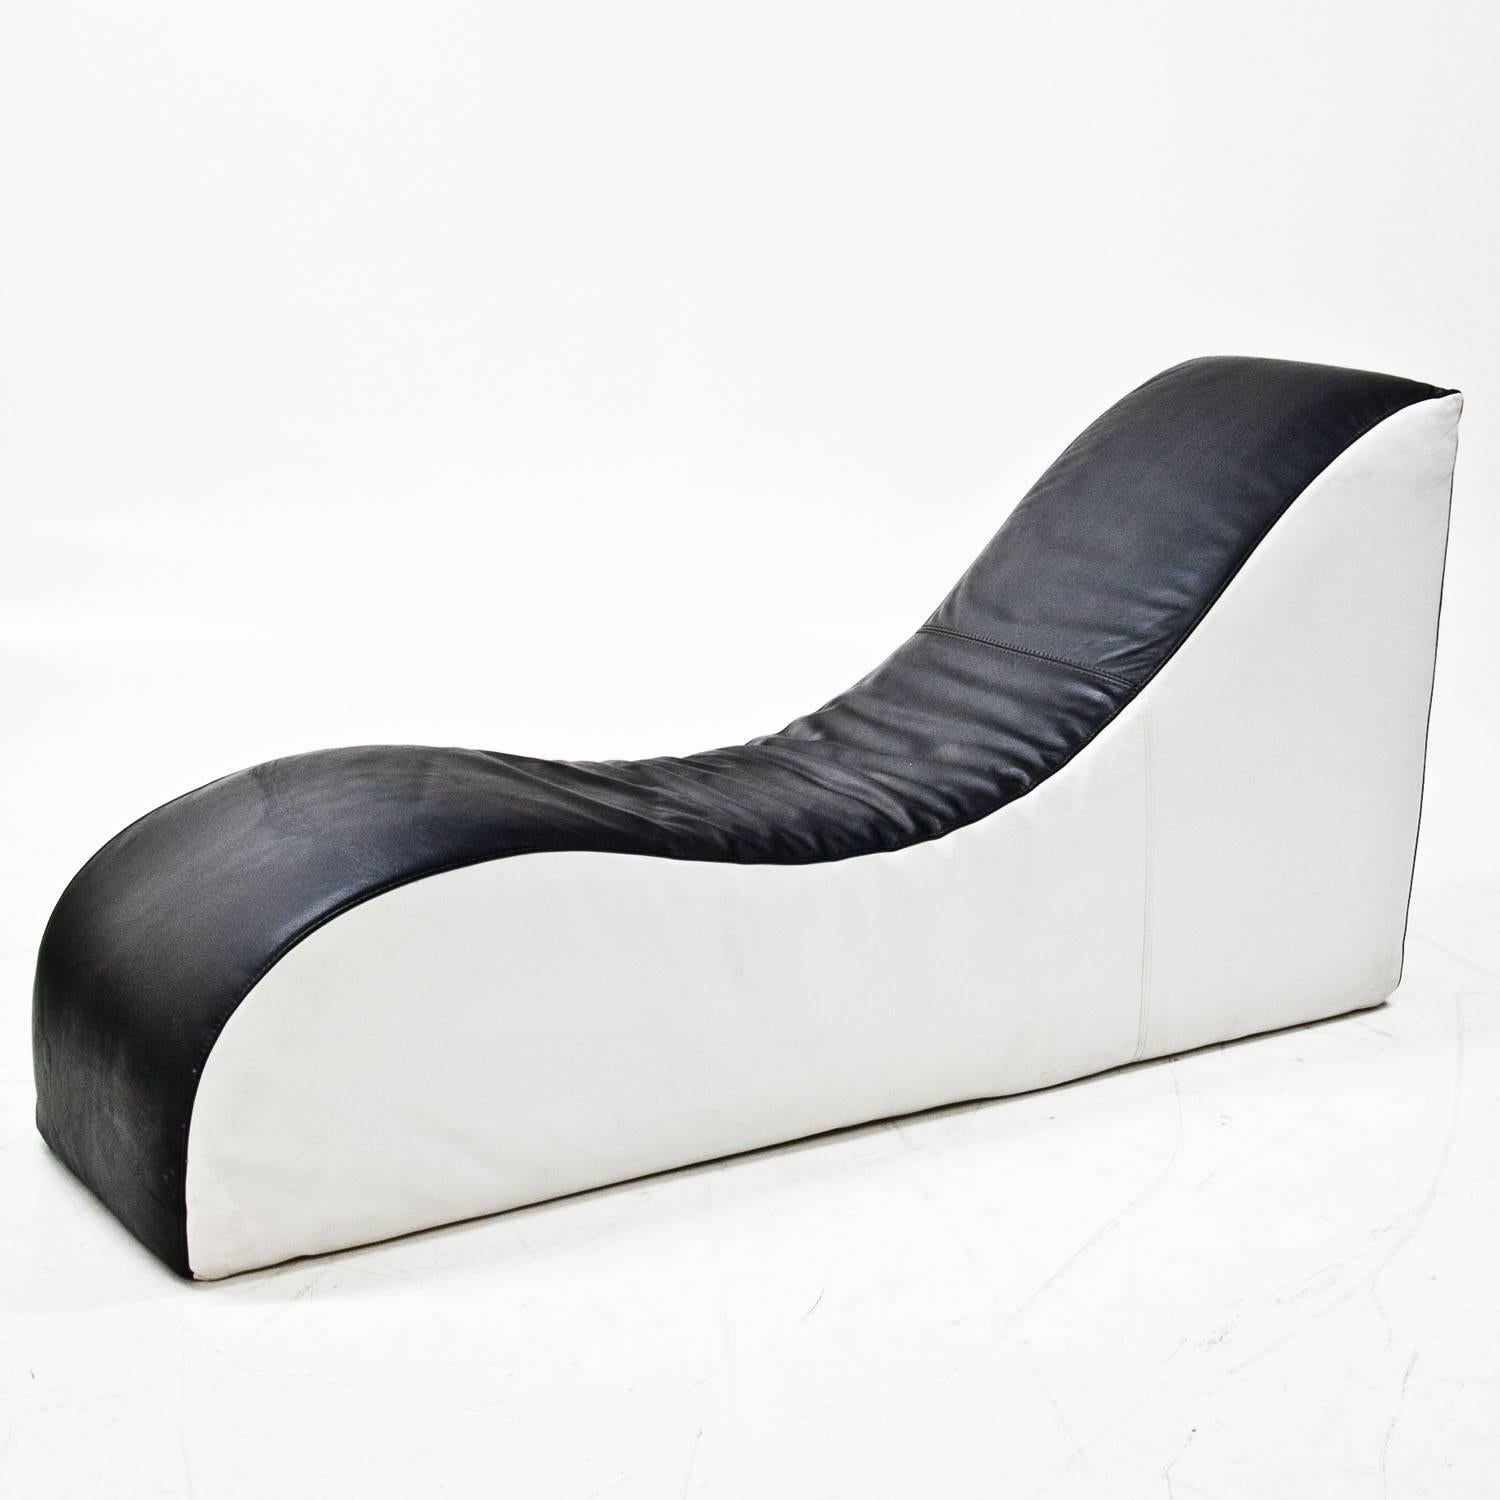 Large recamiere with a black-and-white leather upholstery and small seat. The recamiere is in the shape of an S and contrary to the small seat white on the sides and black on the reclining surface. The leather is in a good, used